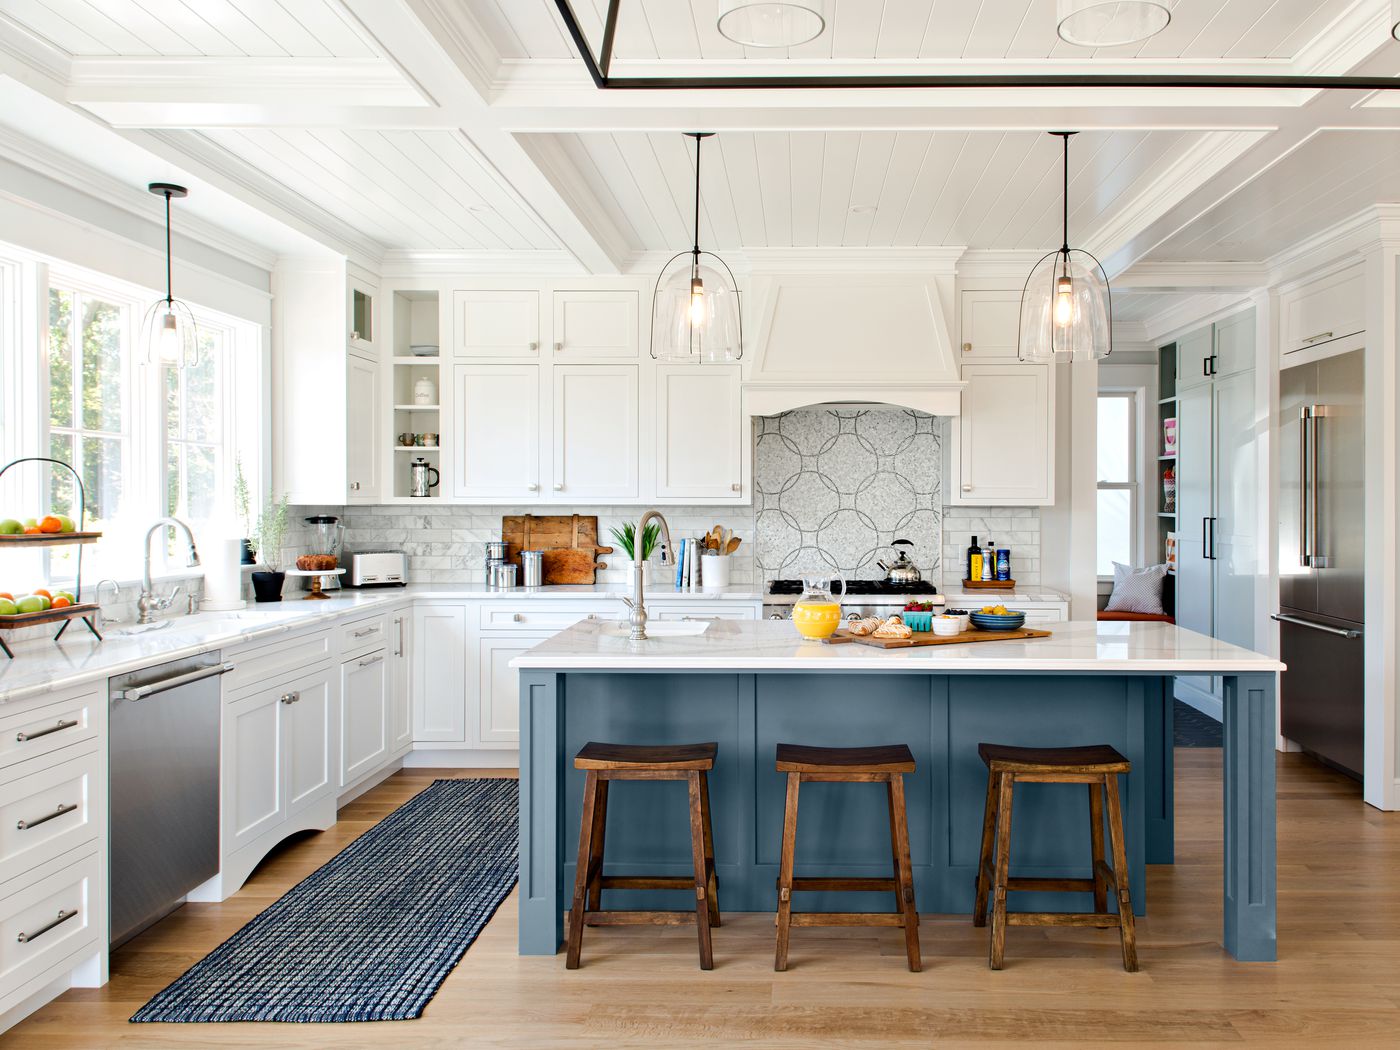 Kitchen Island Ideas: Design Yours to Fit Your Needs 